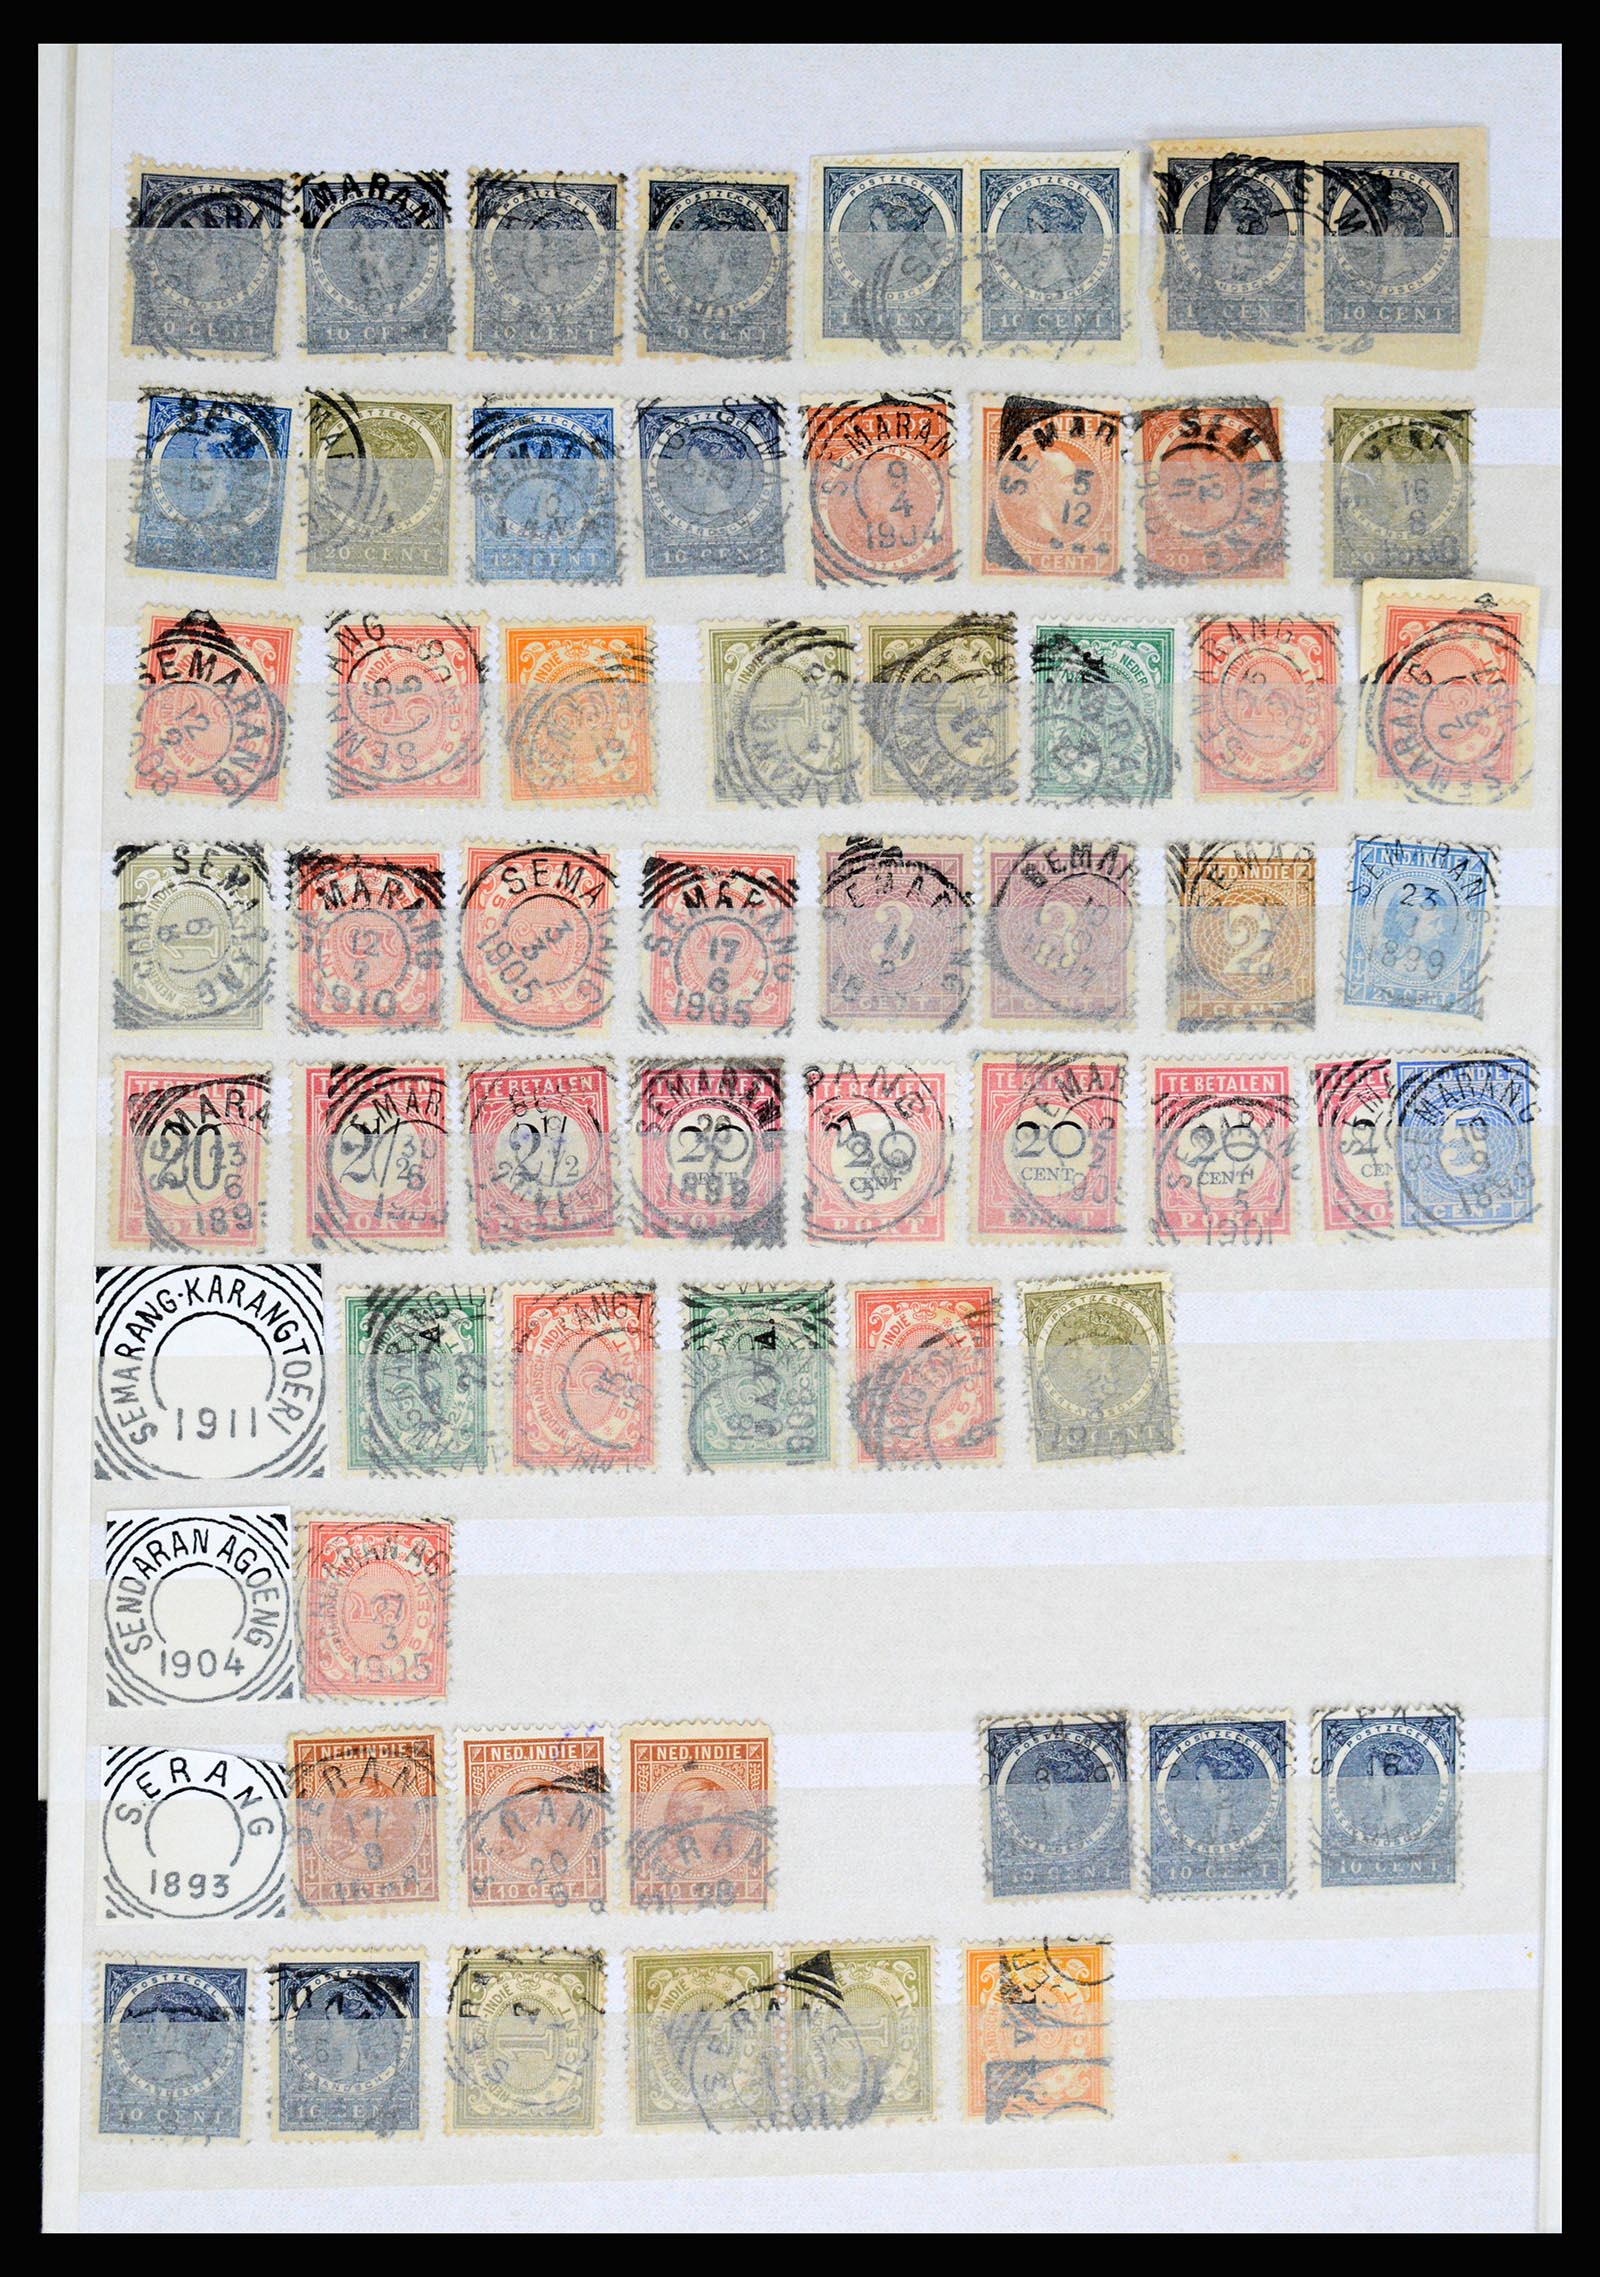 36839 089 - Stamp collection 36839 Dutch east Indies square cancels.